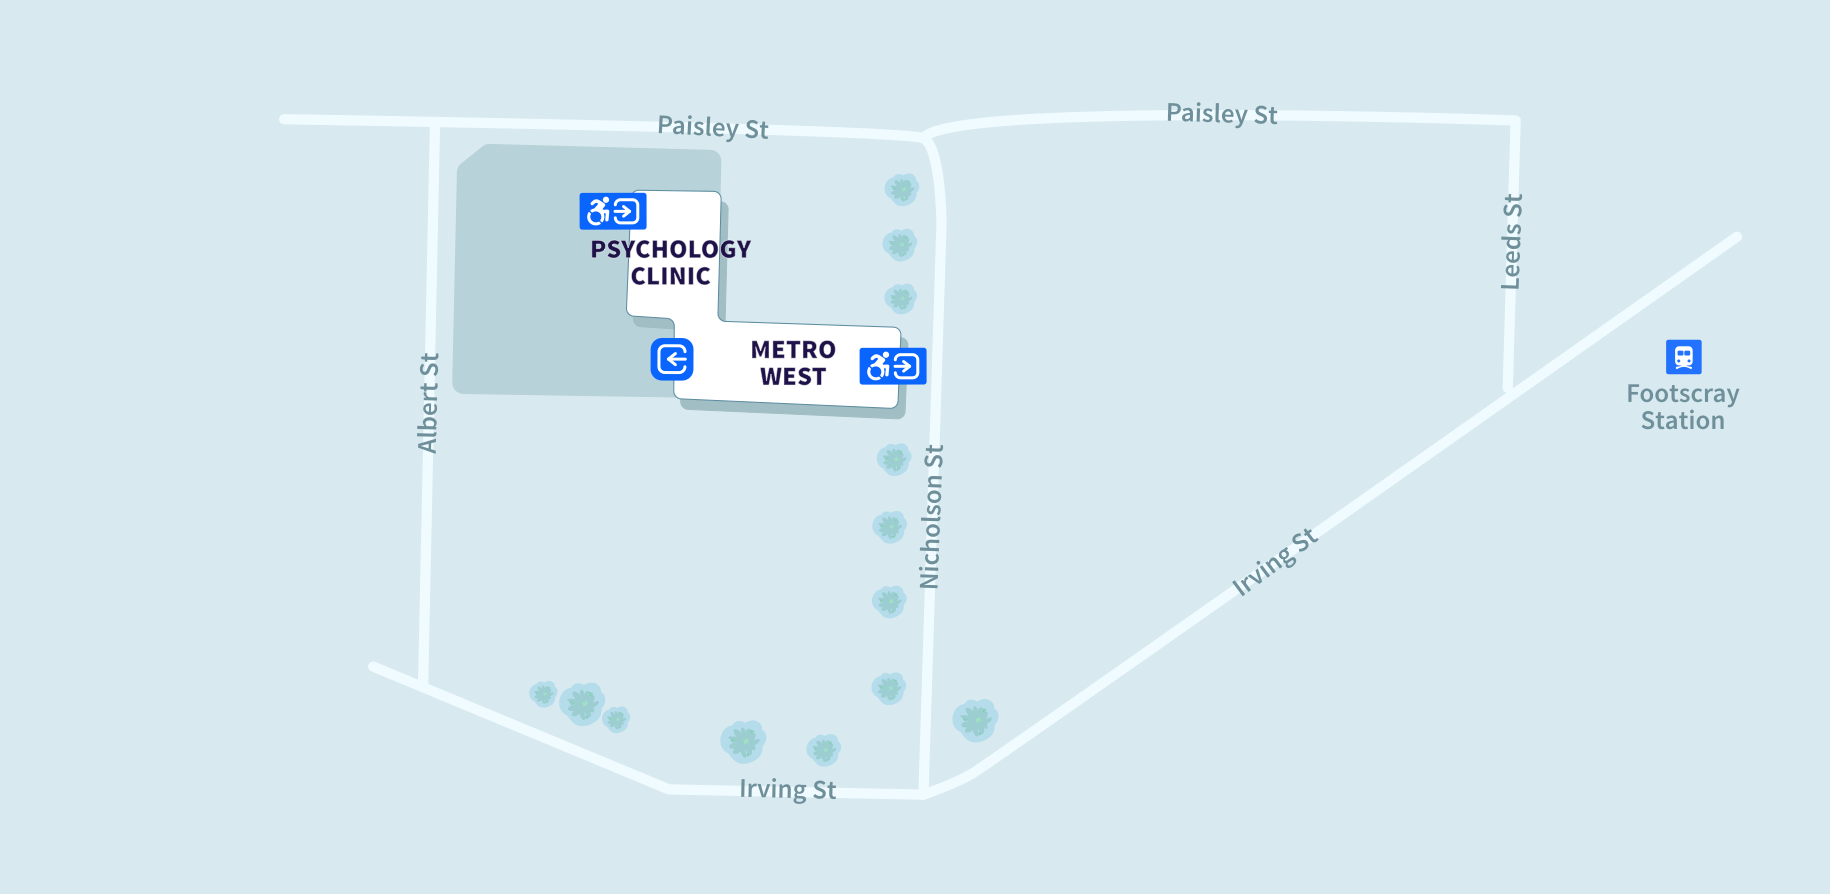 Building map of VU at MetroWest in Footscray, showing the Psychology Clinic and MetroWest. There are three entrances shown, two of which are accessible (Paisley St and Nicholson St).